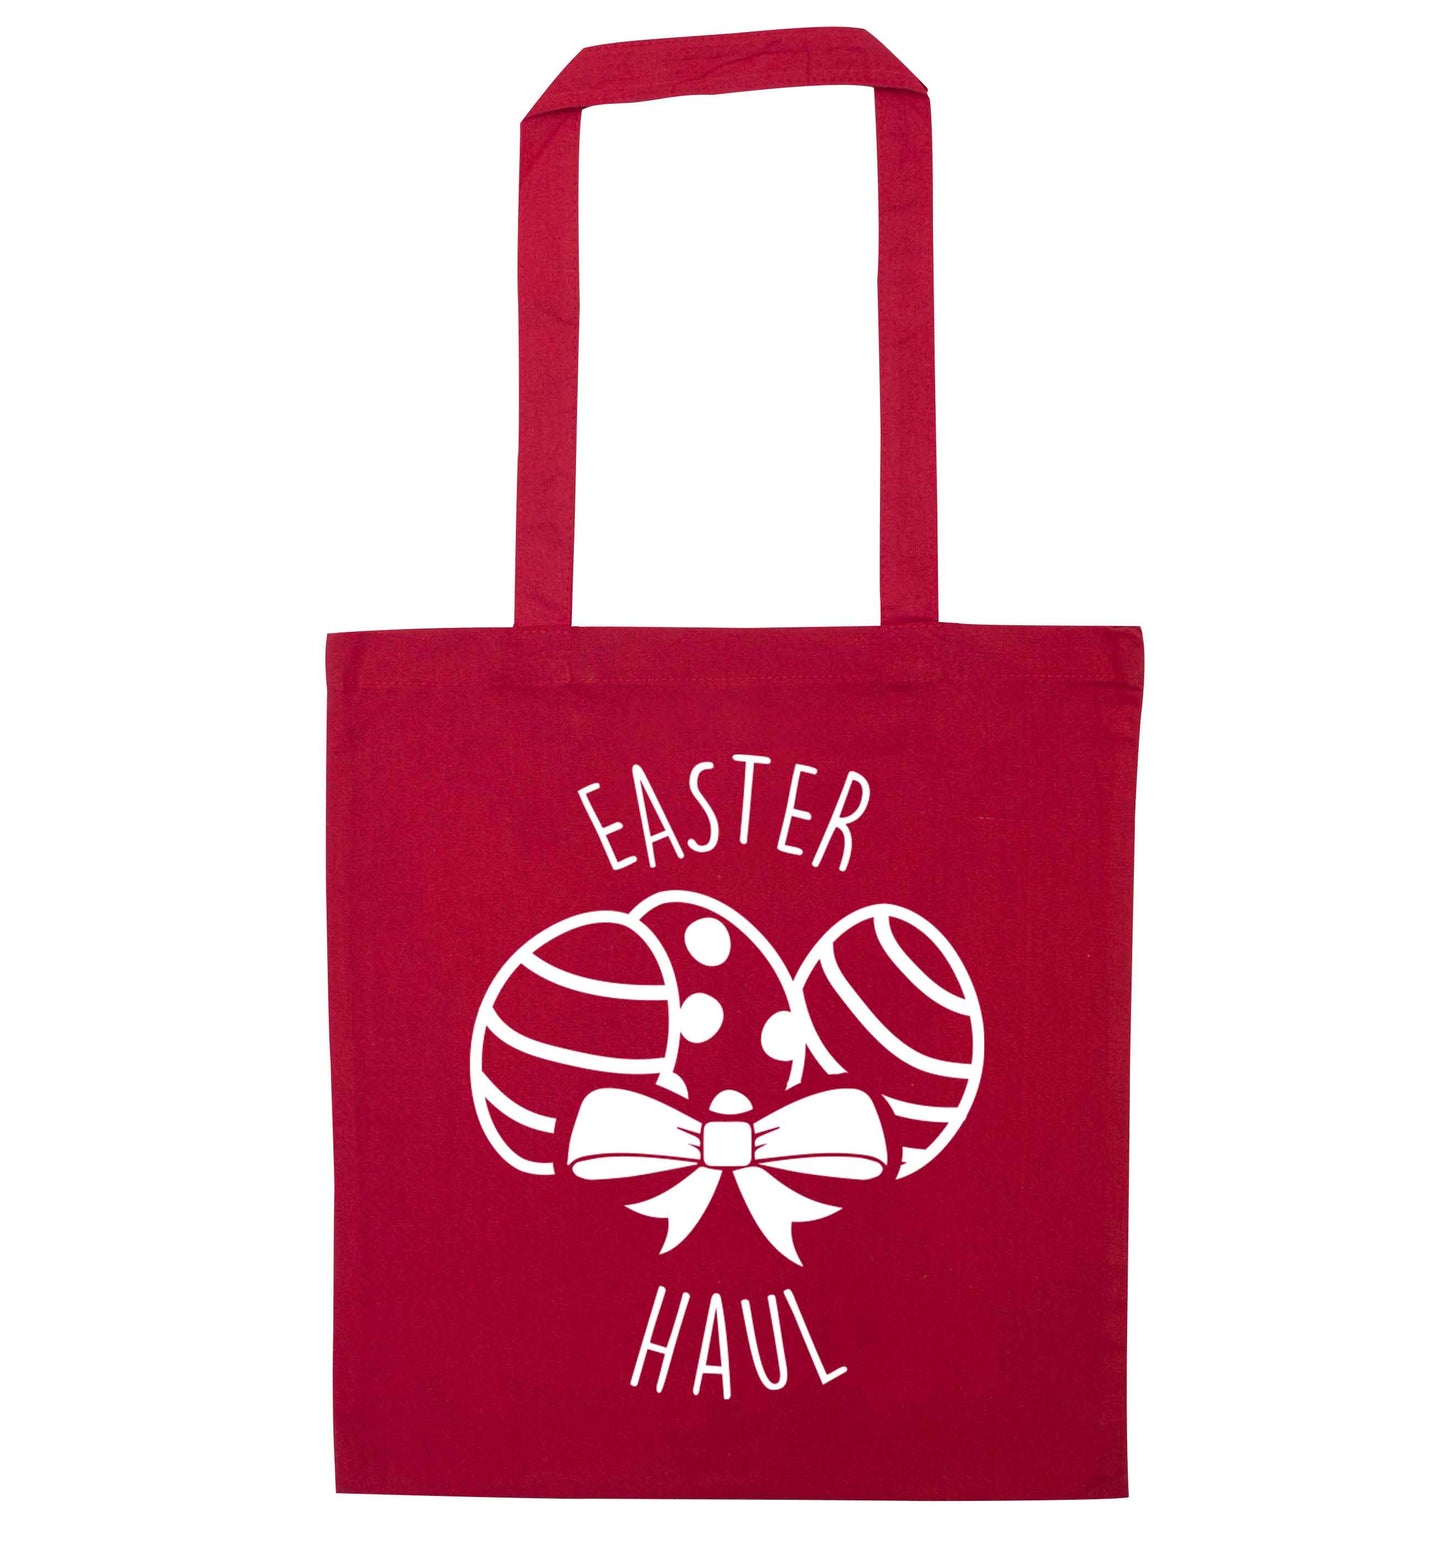 Easter haul red tote bag